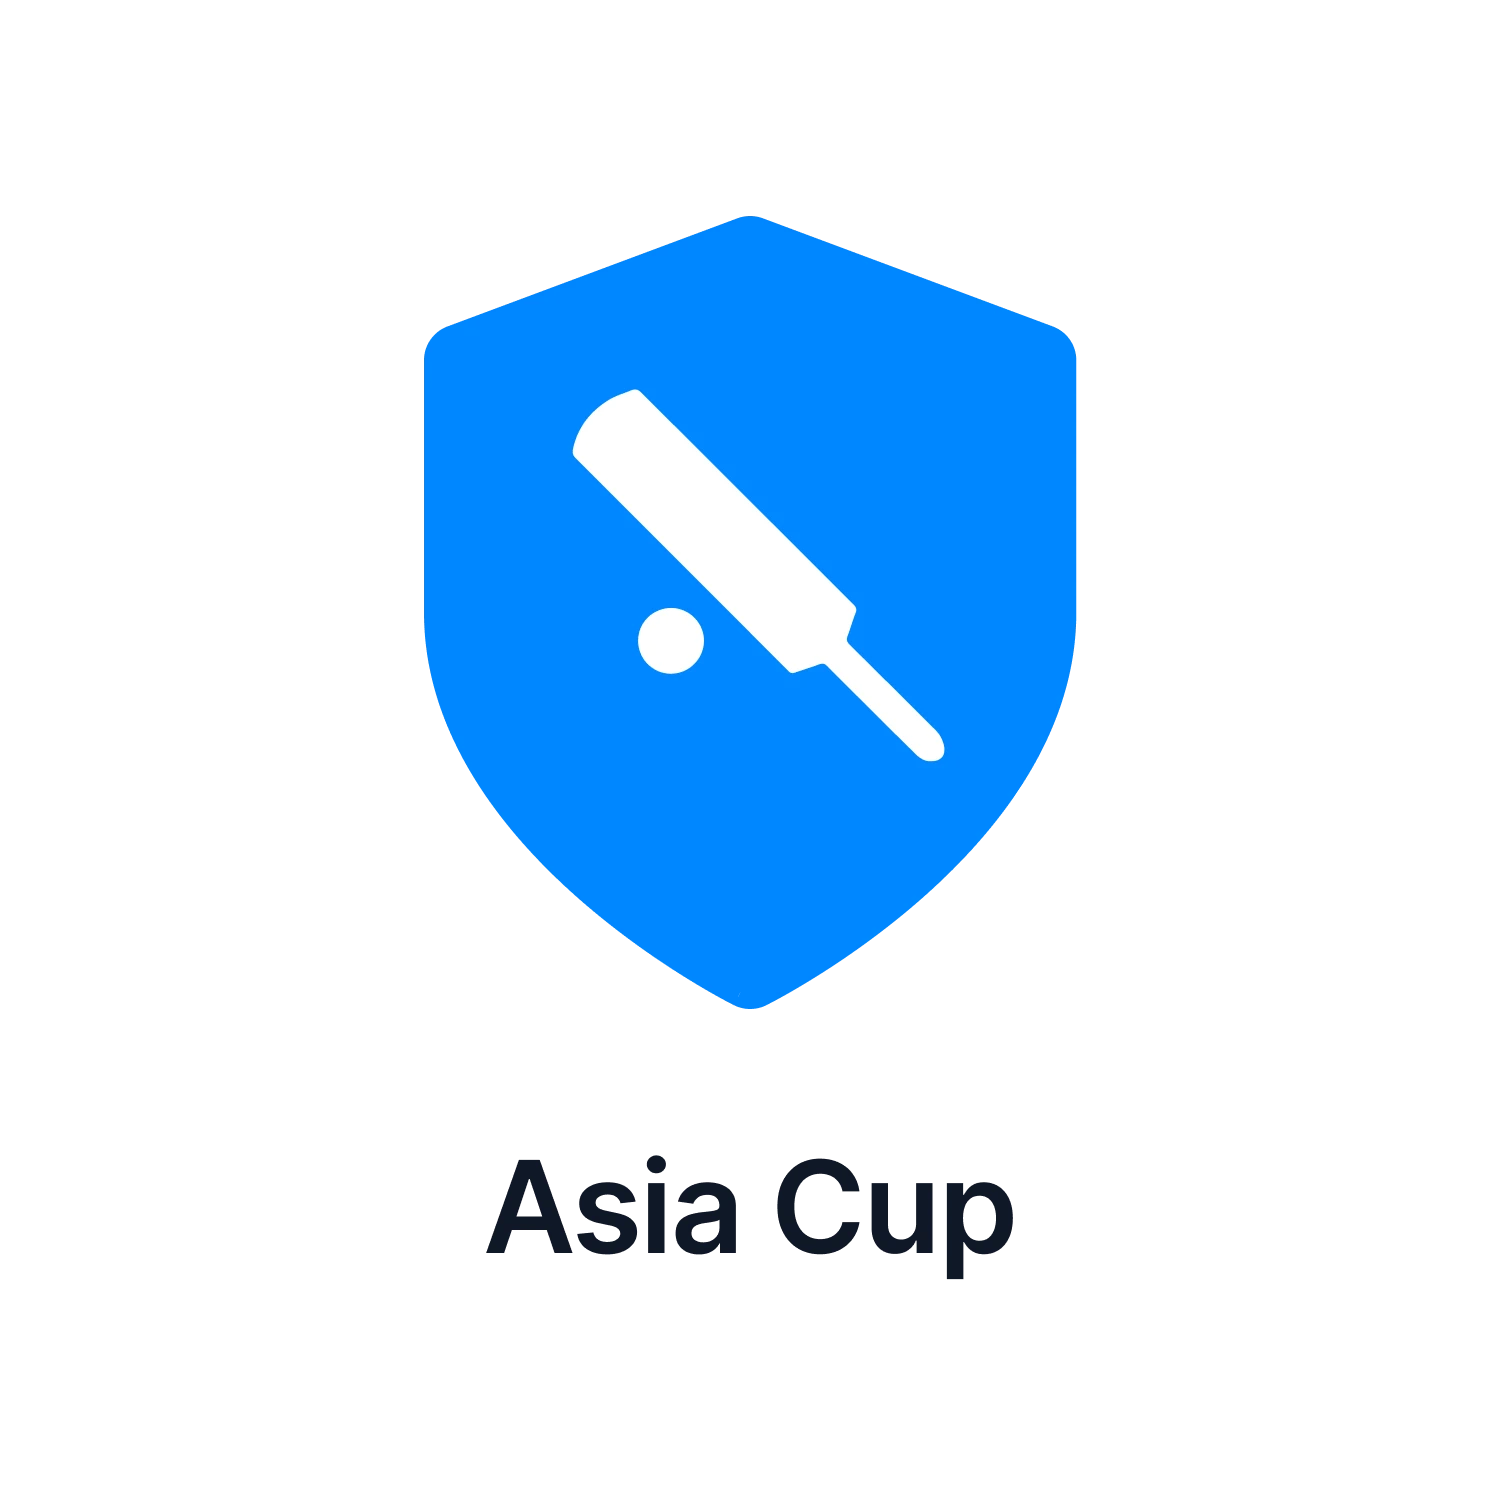 Read the expert predictions on the Asia Cup matches.